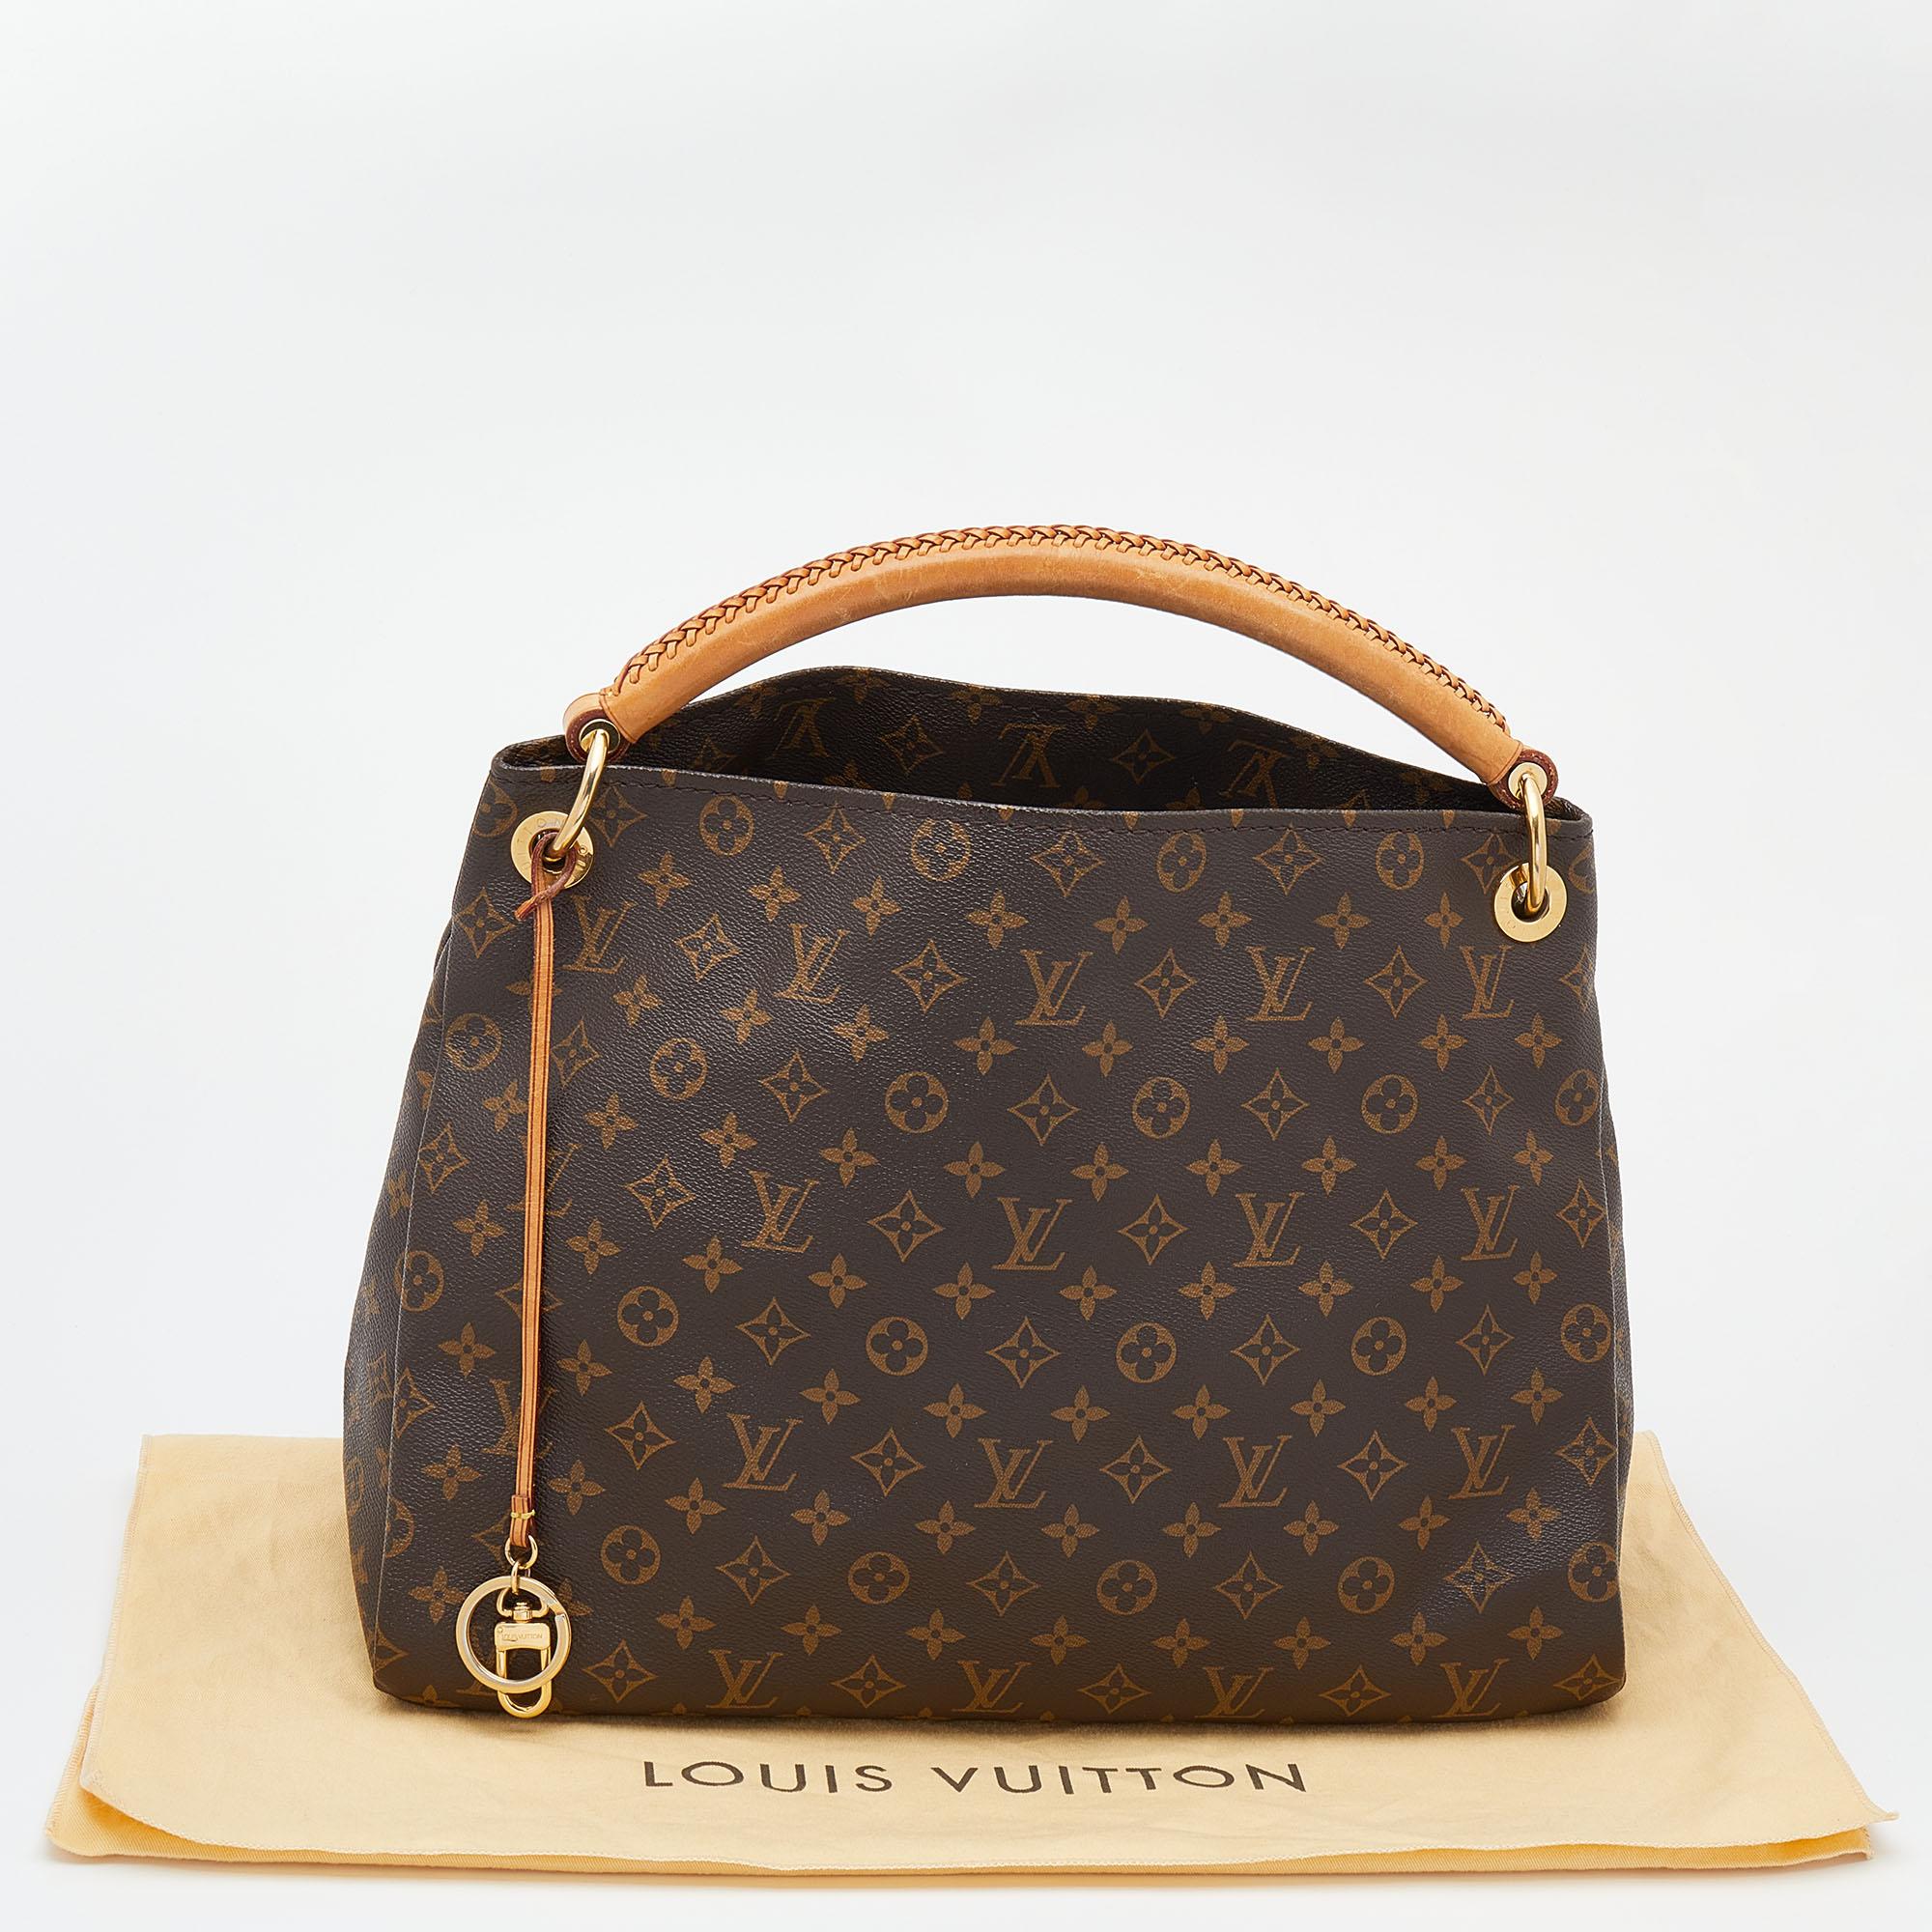 Louis Vuitton Monogram Canvas and Leather Artsy MM Bag 7